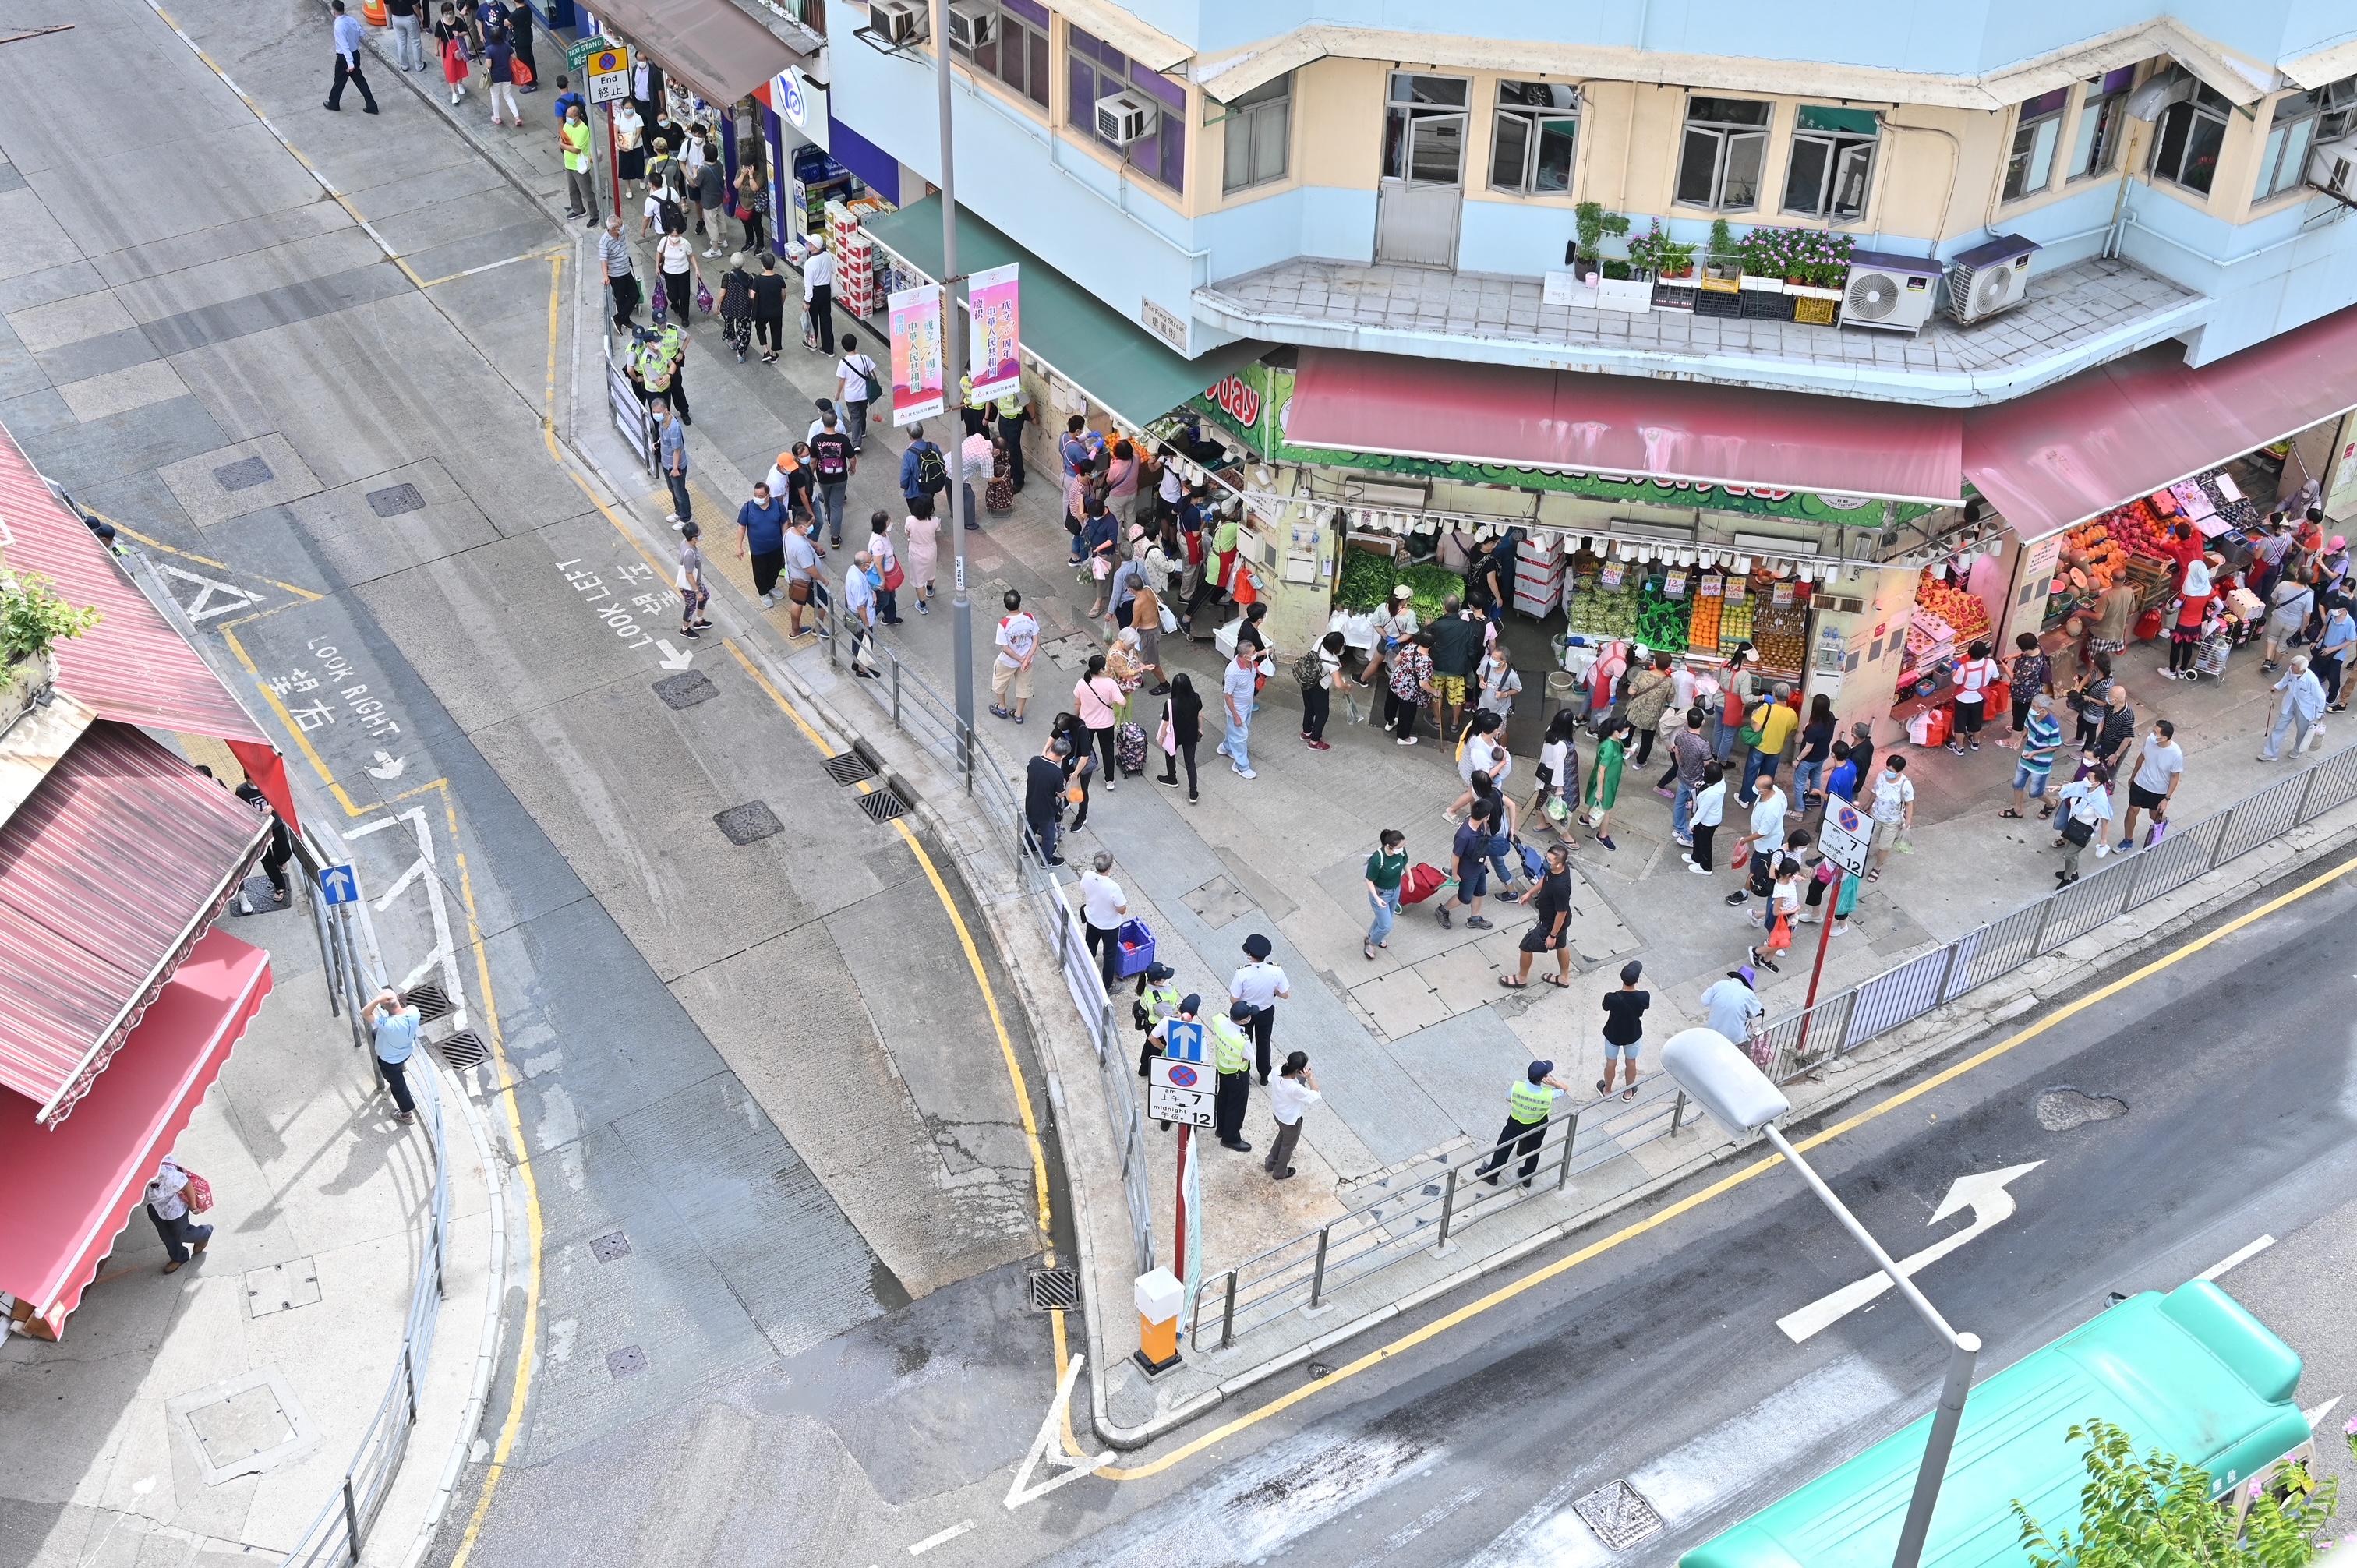 A spokesman for the Food and Environmental Hygiene Department (FEHD) said today (October 17) that the FEHD and the Hong Kong Police Force have conducted a series of stringent enforcement actions against illegal shop front extension activities in various districts since October 3. Photo shows the condition of a street in Wong Tai Sin District after a joint operation.